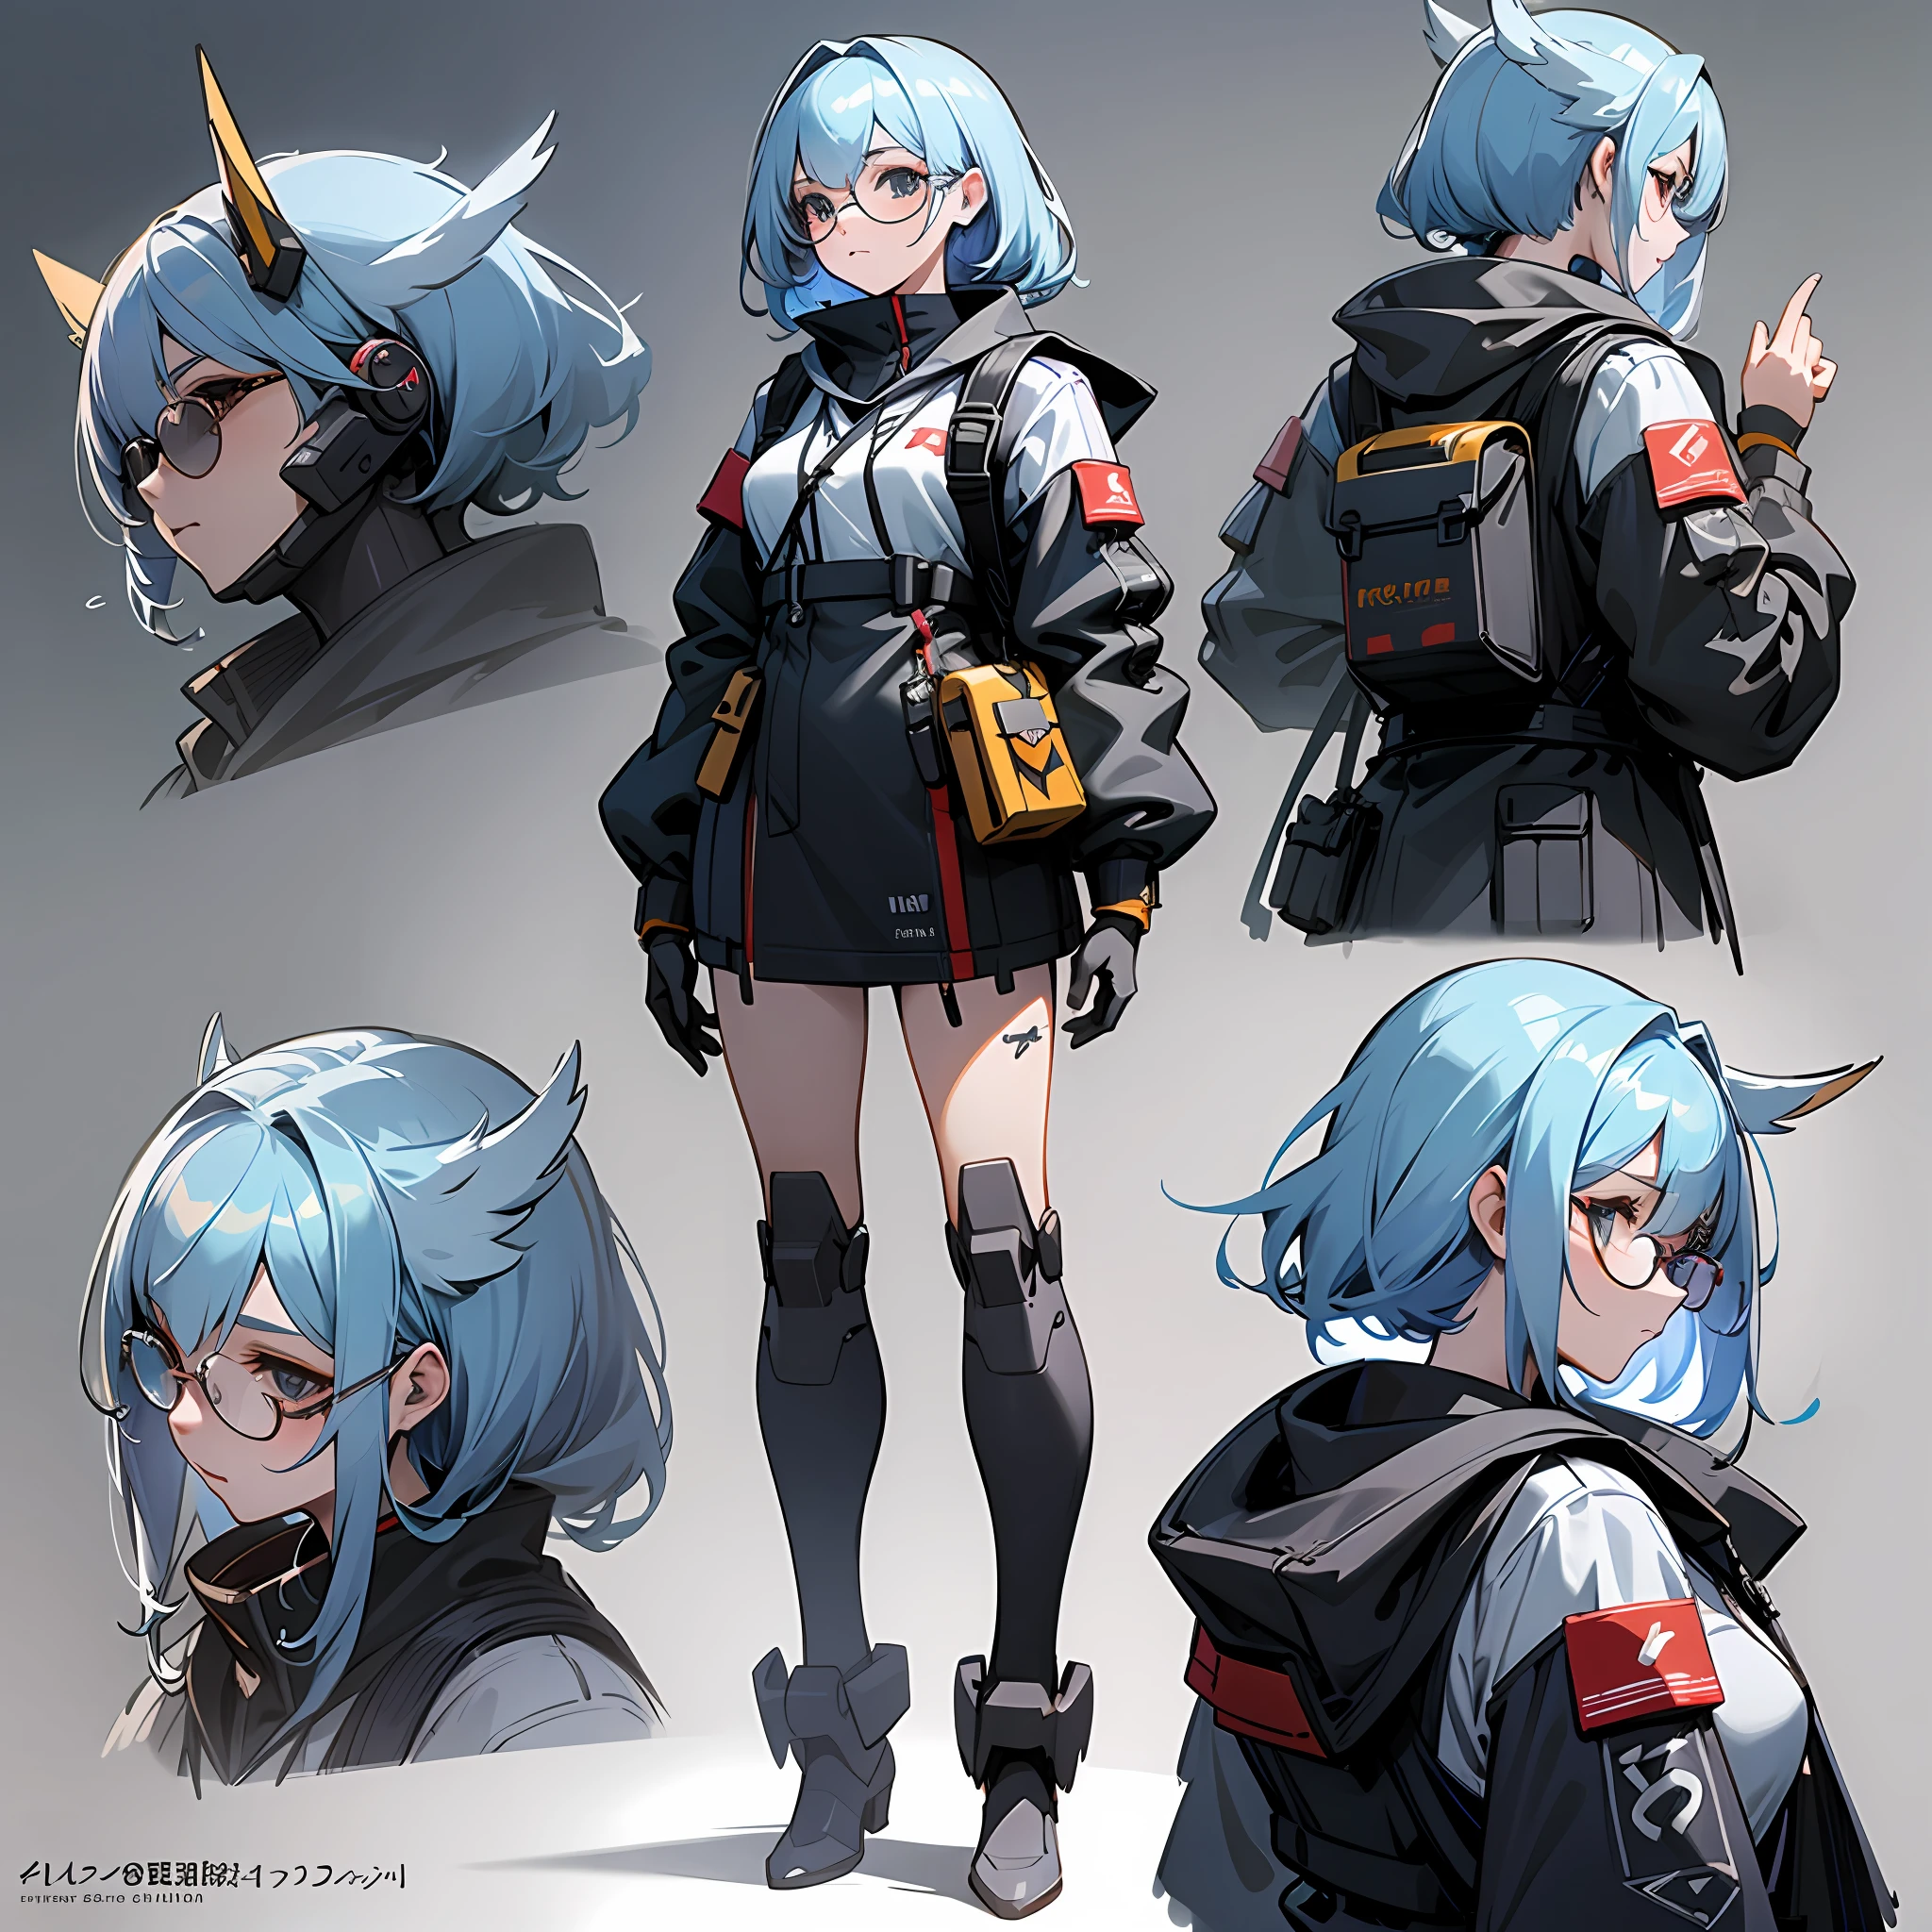 l2459072752-{best quality}, {{masterpiece}}, {high resolution},)) character design sheet, same character, front, side, back)) Original, extremely detailed 8K wallpaper, 1girl, {extremely delicate and beautiful}, anime character design of a woman with a backpack and backpack, a battle robot with glasses behind a girl, concept art for senior character artists, Pixiv trend, furry art, anime concept art, Ethereal and mecha themes in the back, great character design, Artstation pixiv trends, [character design], clean concept art, detailed anime character art, anime character design,